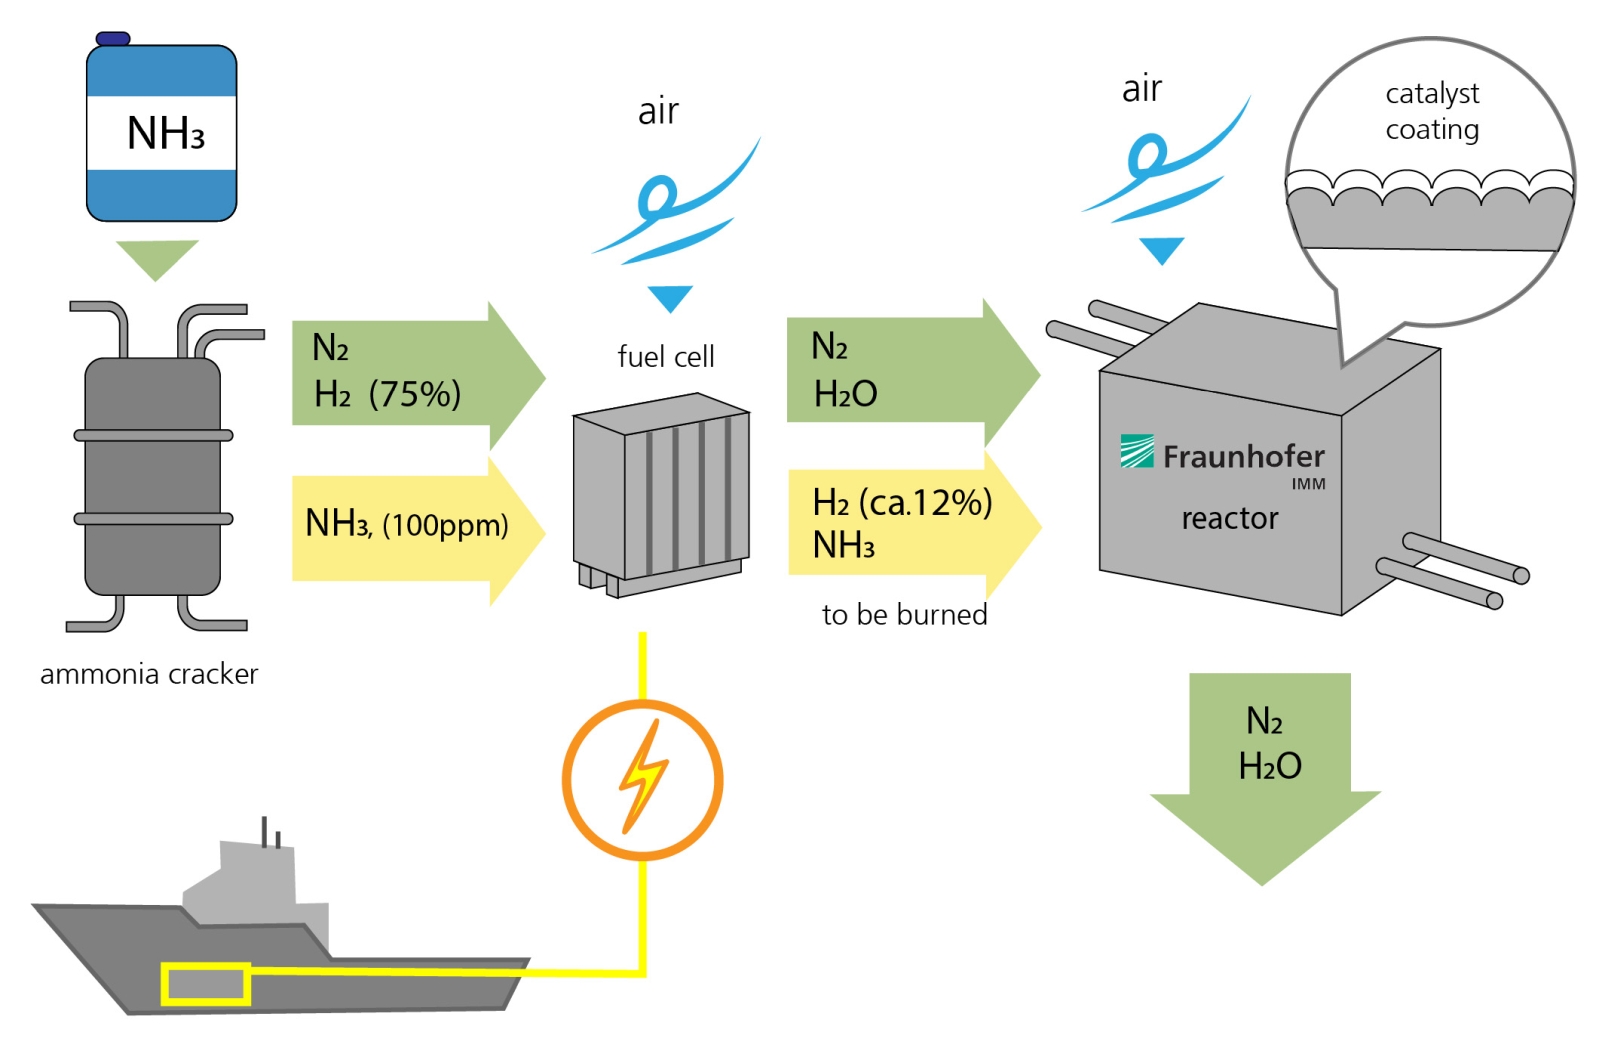 Ammonia is split into nitrogen and hydrogen in the ammonia cracker. The latter is then burned in the fuel cell to generate electricity. The catalytic converter ensures that no harmful nitrogen oxides are produced. The only end products are water and nitrogen.